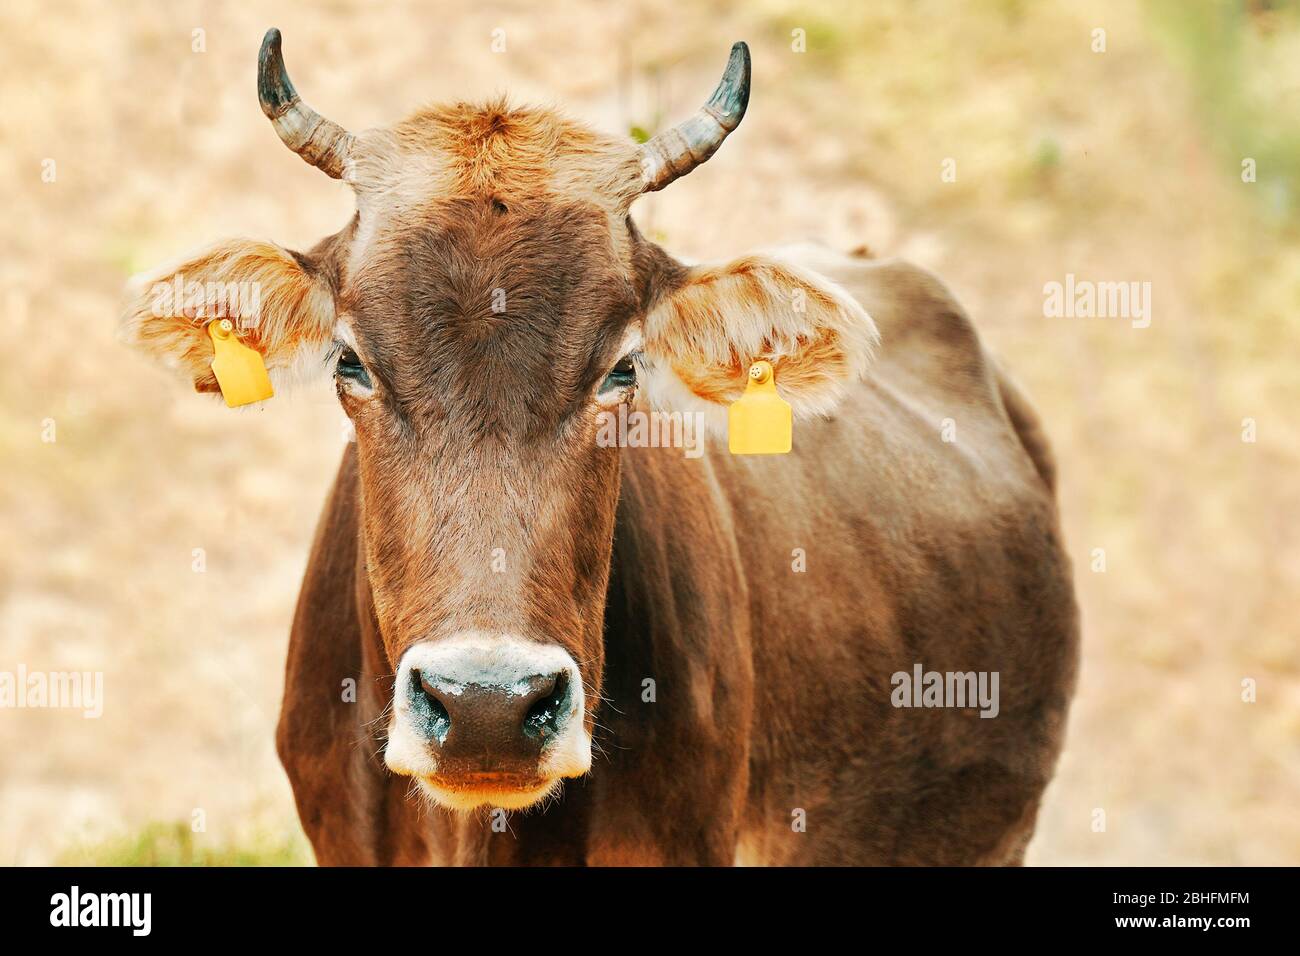 Cow with ear tags. A portrait of a bull looking right at you. Stock Photo